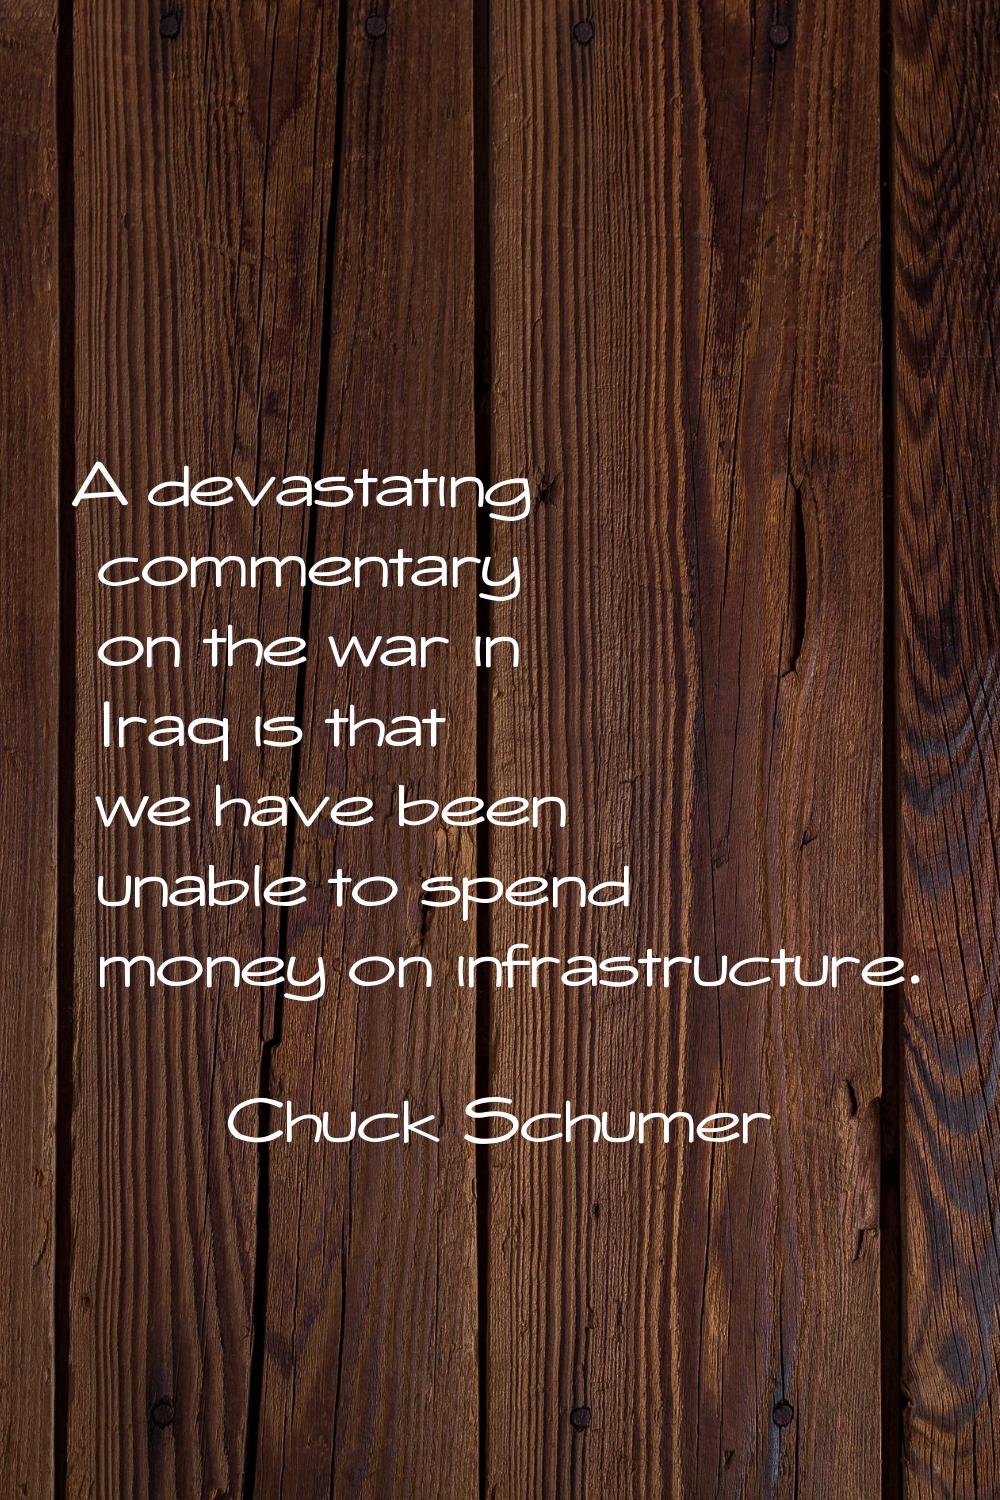 A devastating commentary on the war in Iraq is that we have been unable to spend money on infrastru